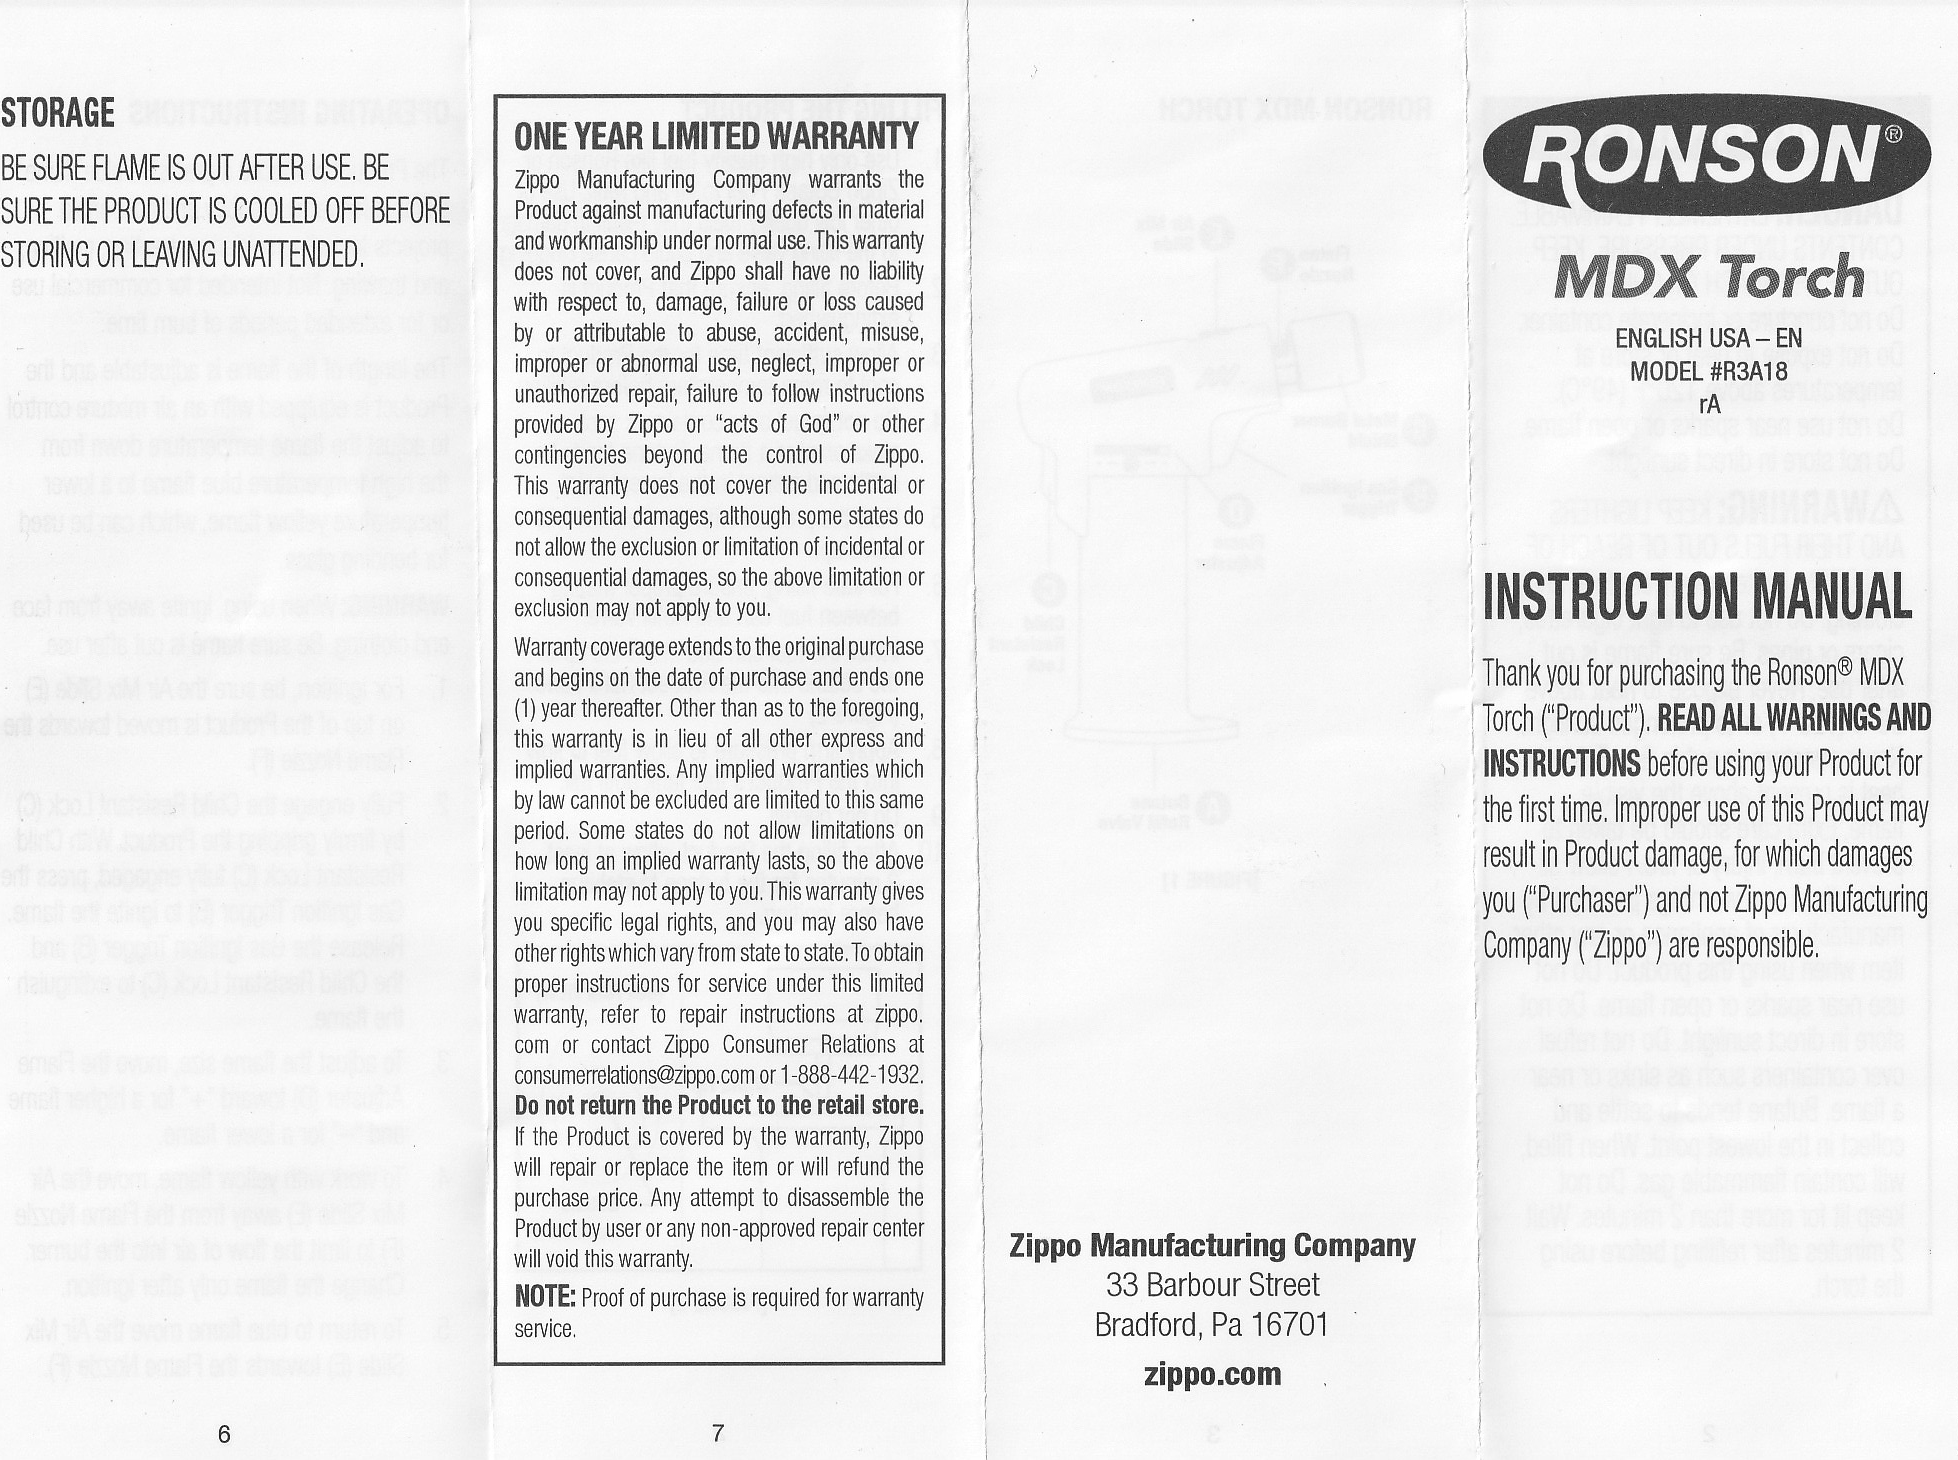 Ronson MDX Torch instructions pg 1